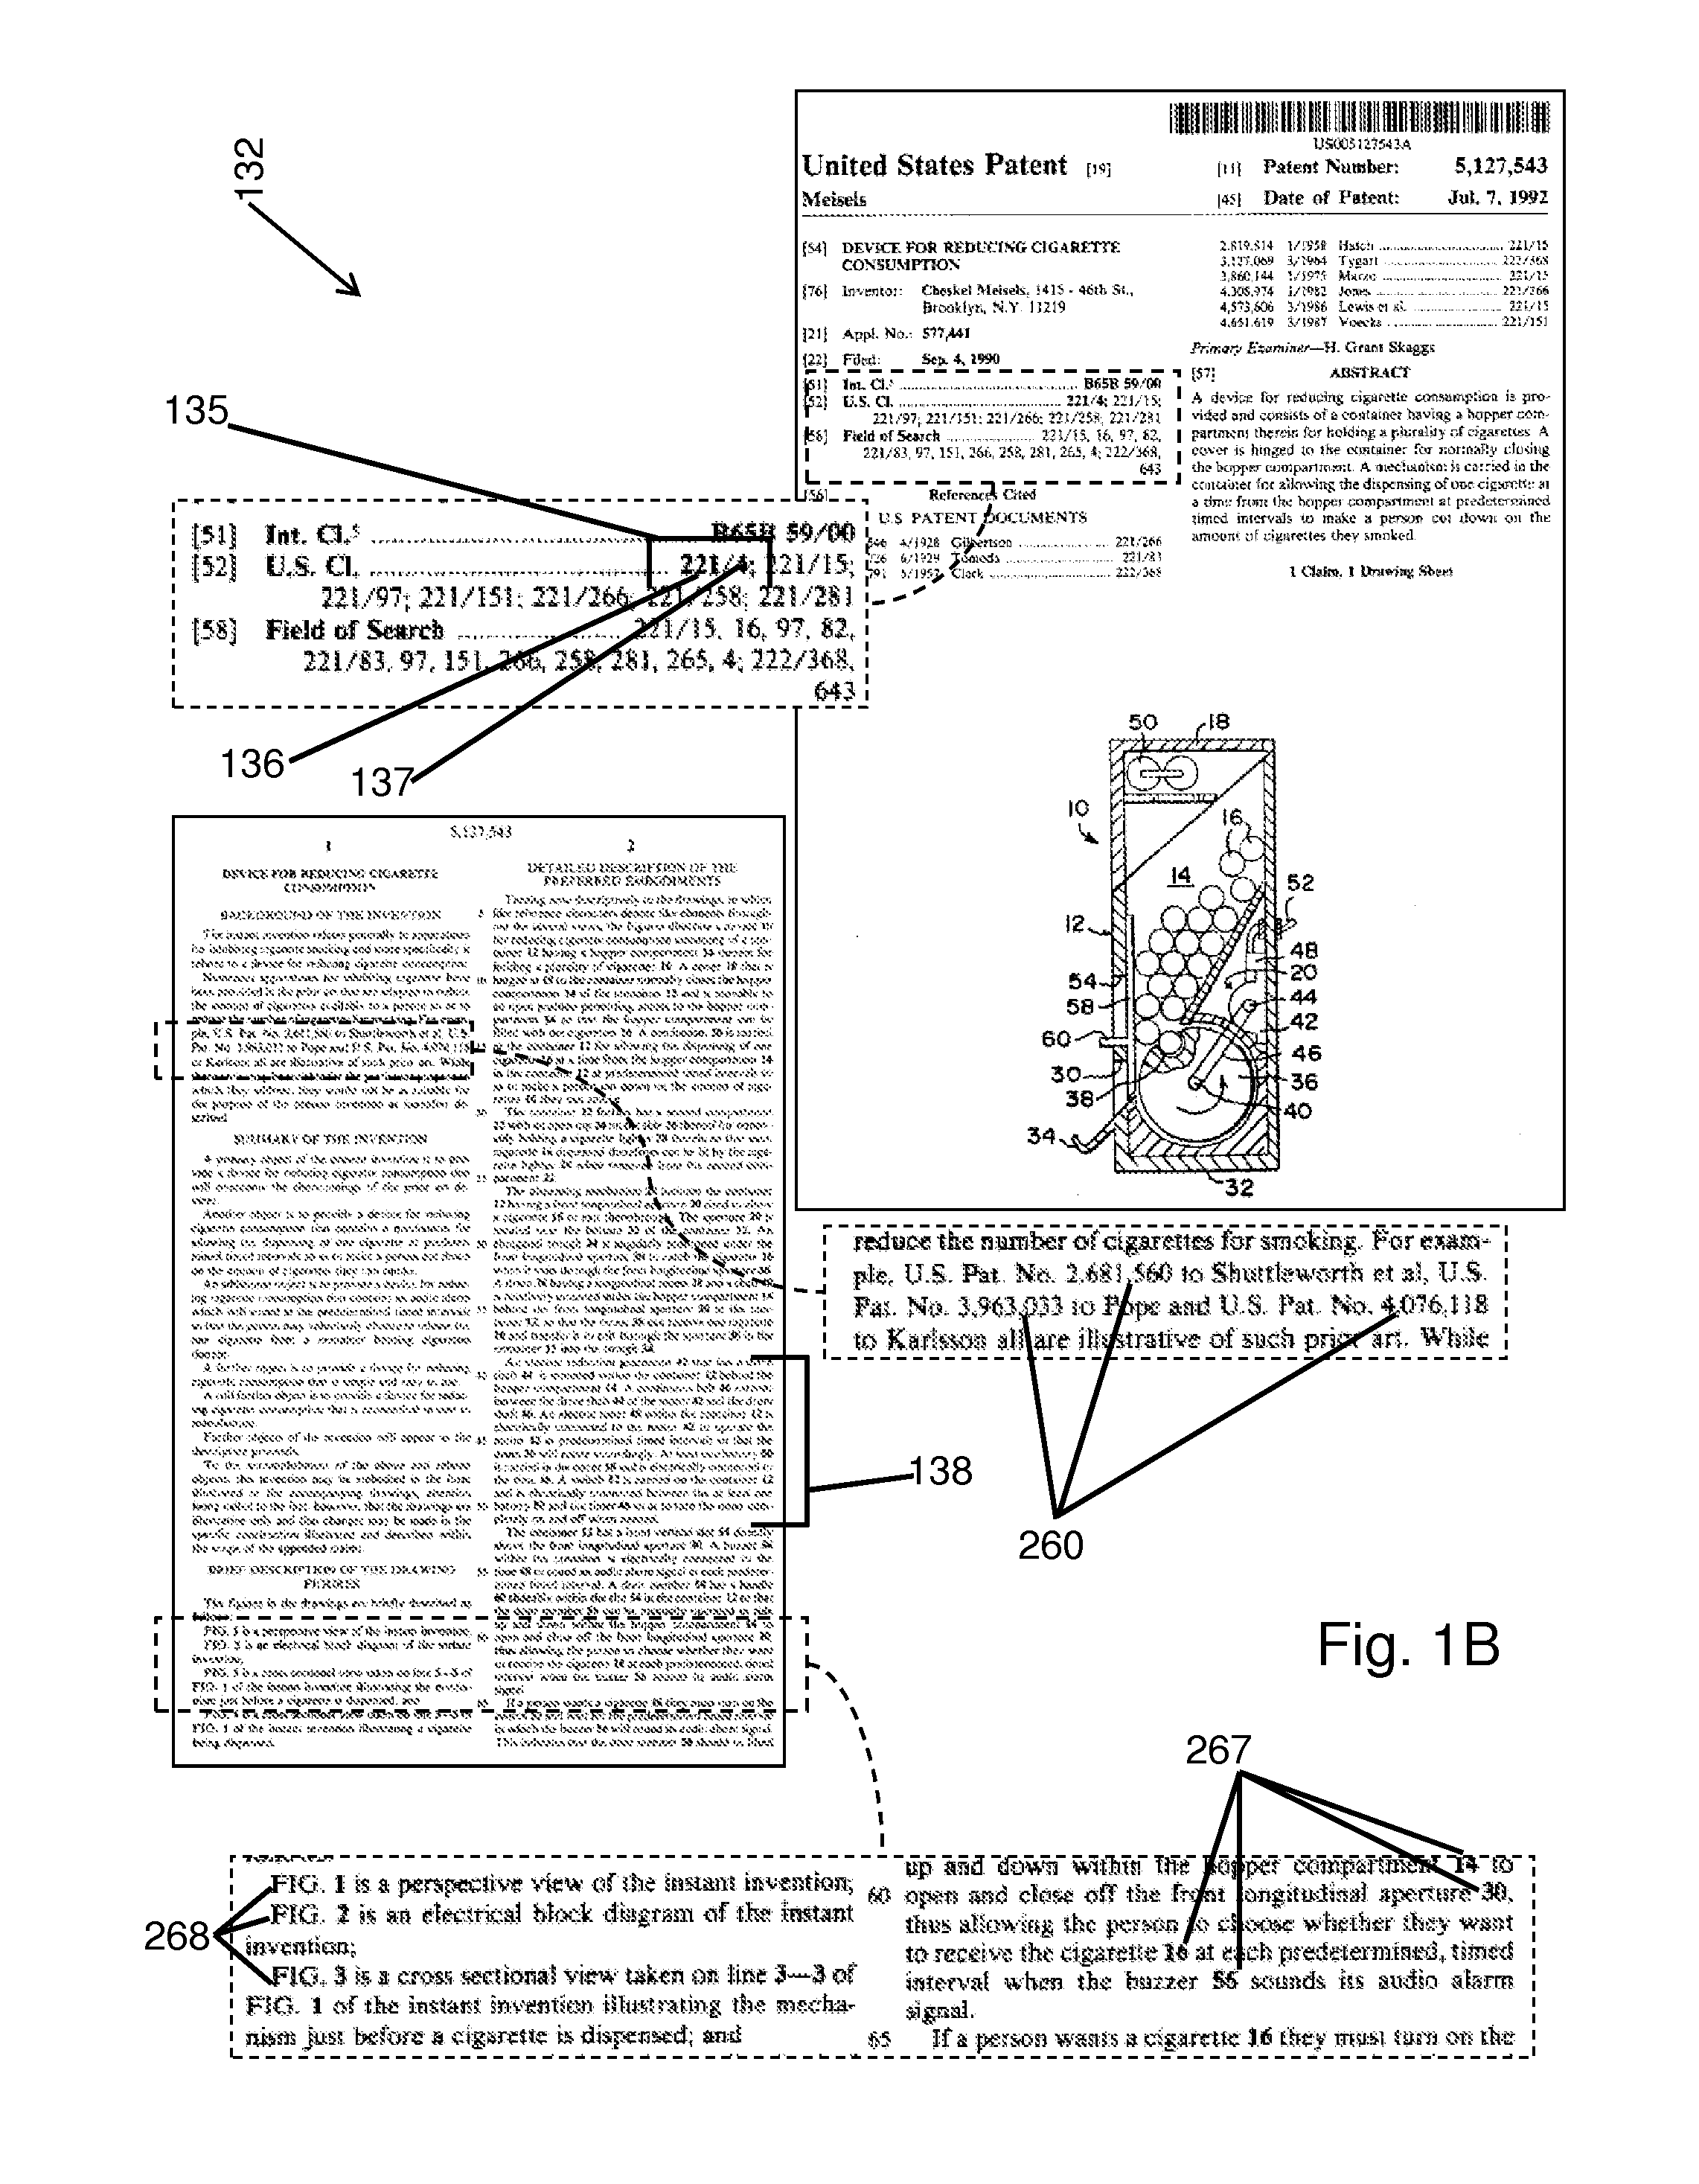 Method and system for document presentation and analysis